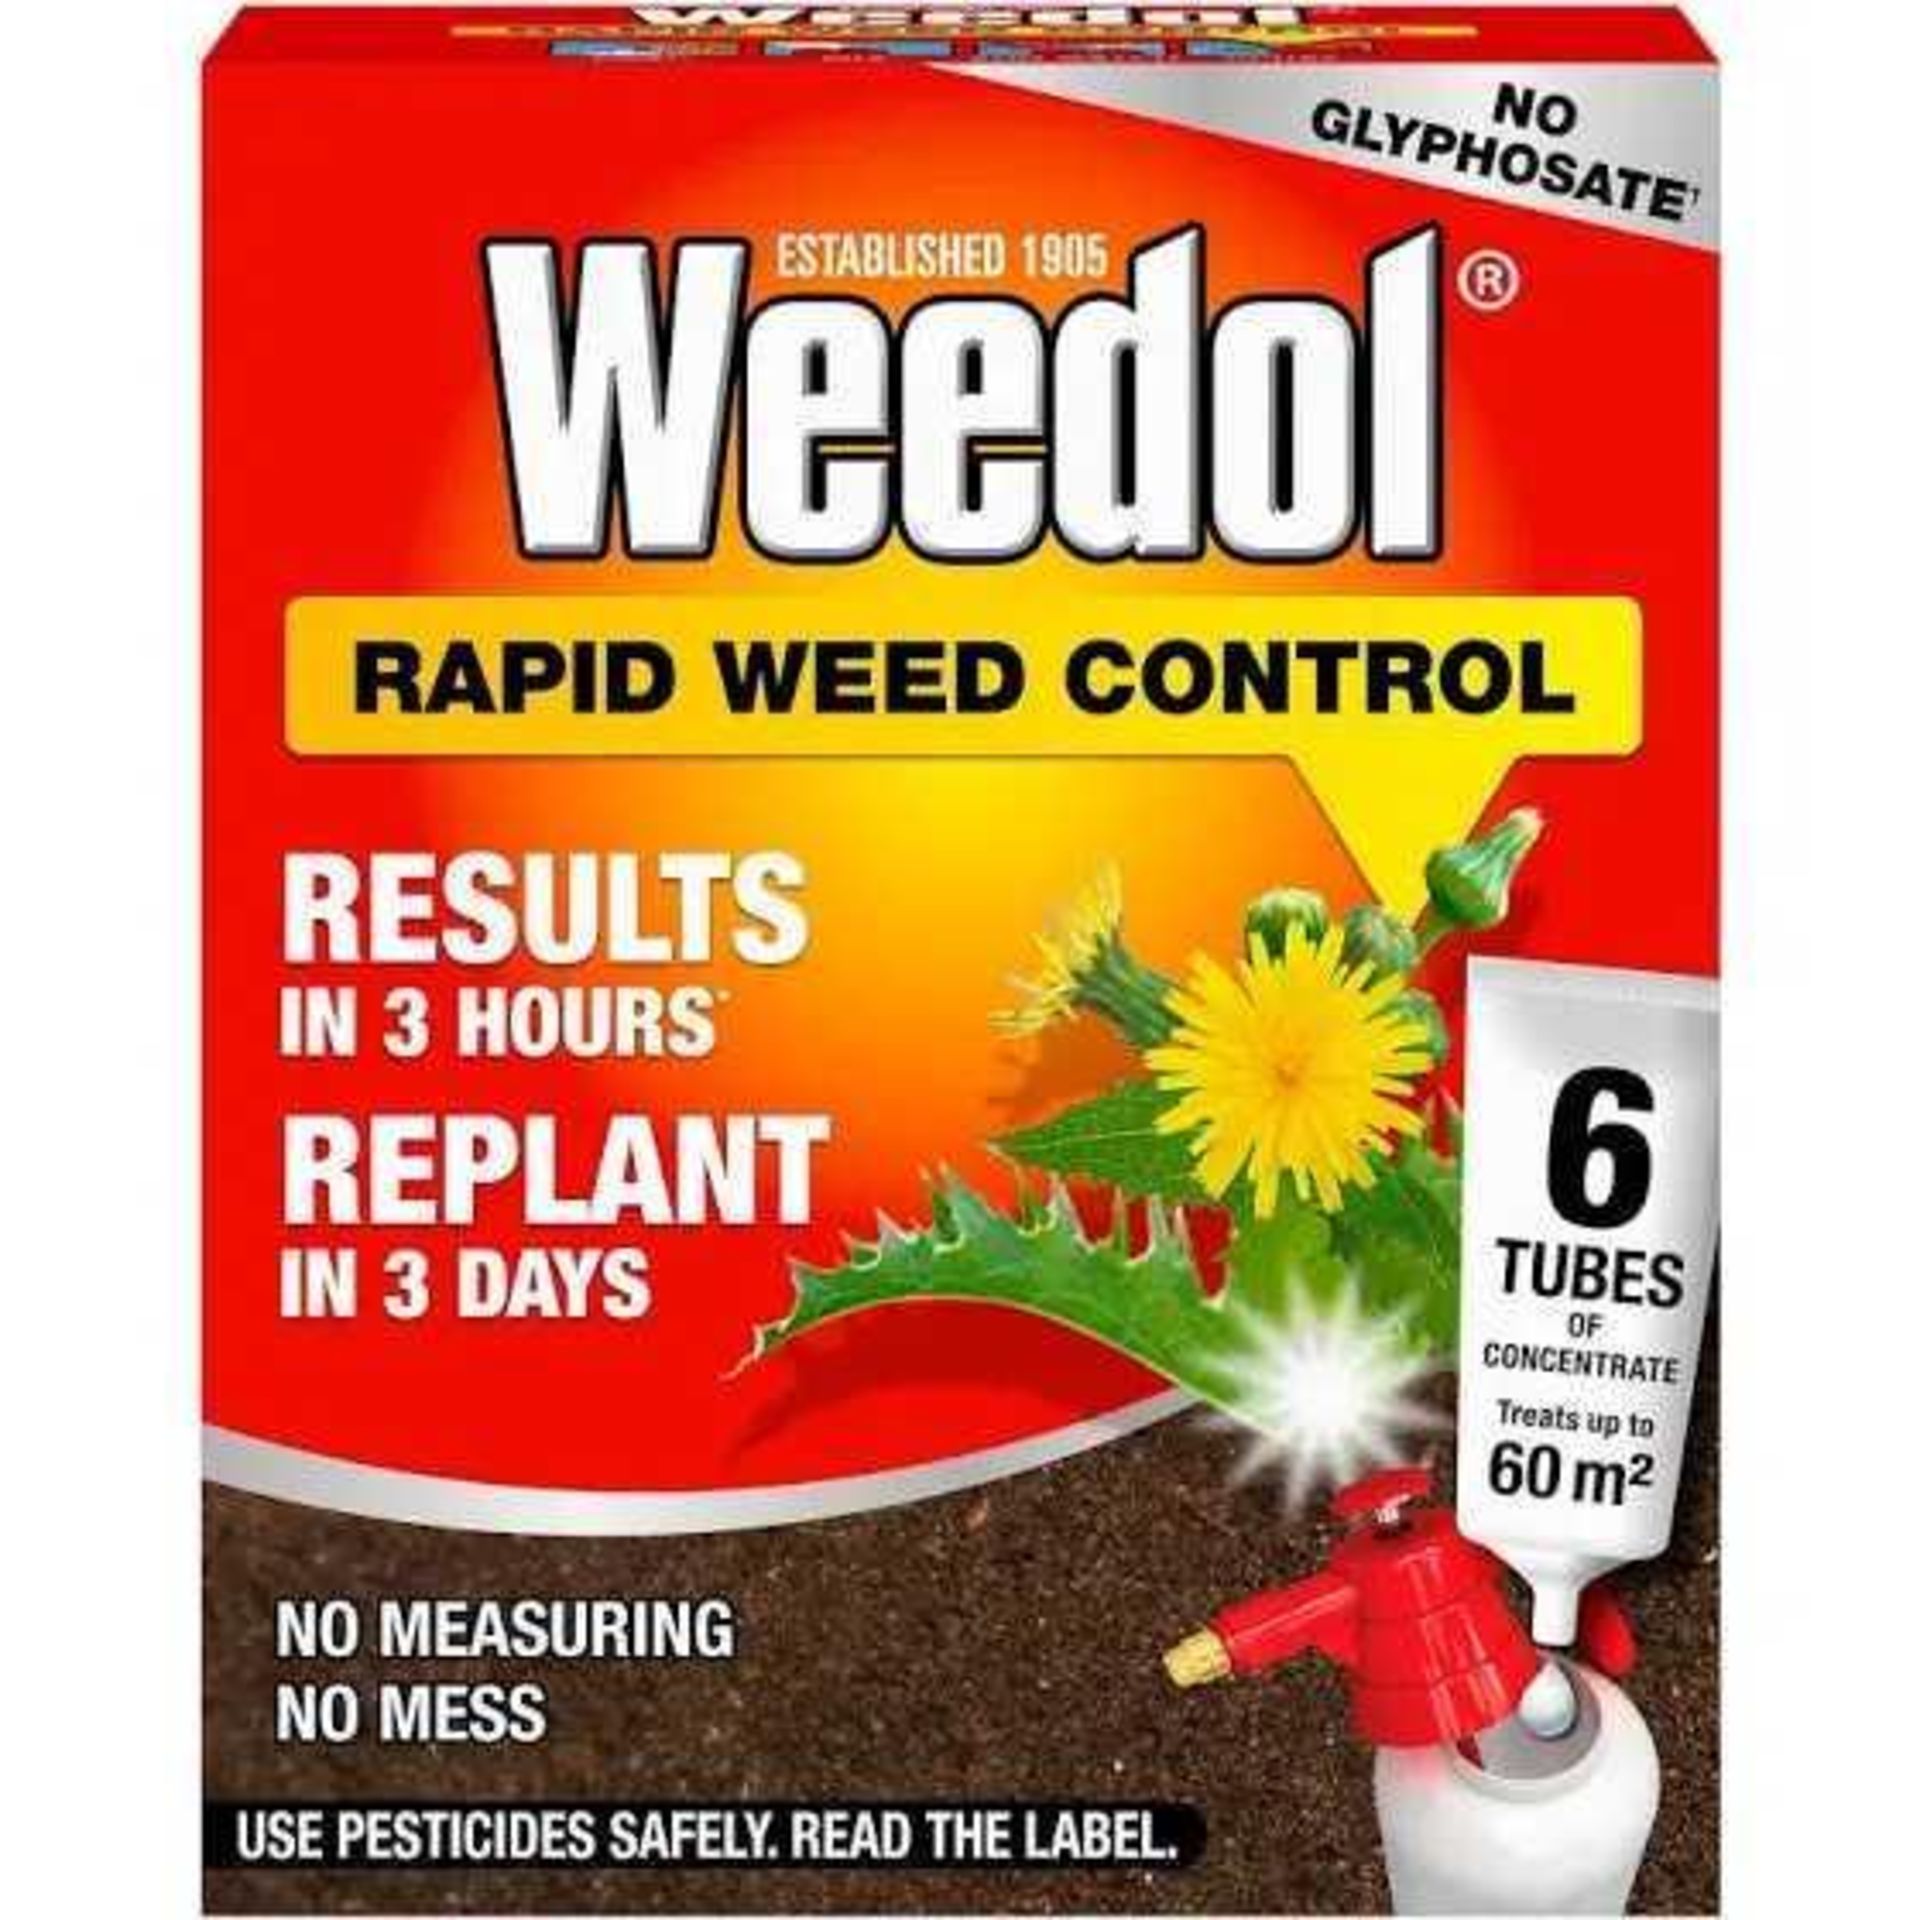 RRP £120 Brand New Boxed X3 Weedol Ultra Tough Weedkiller Concentrate